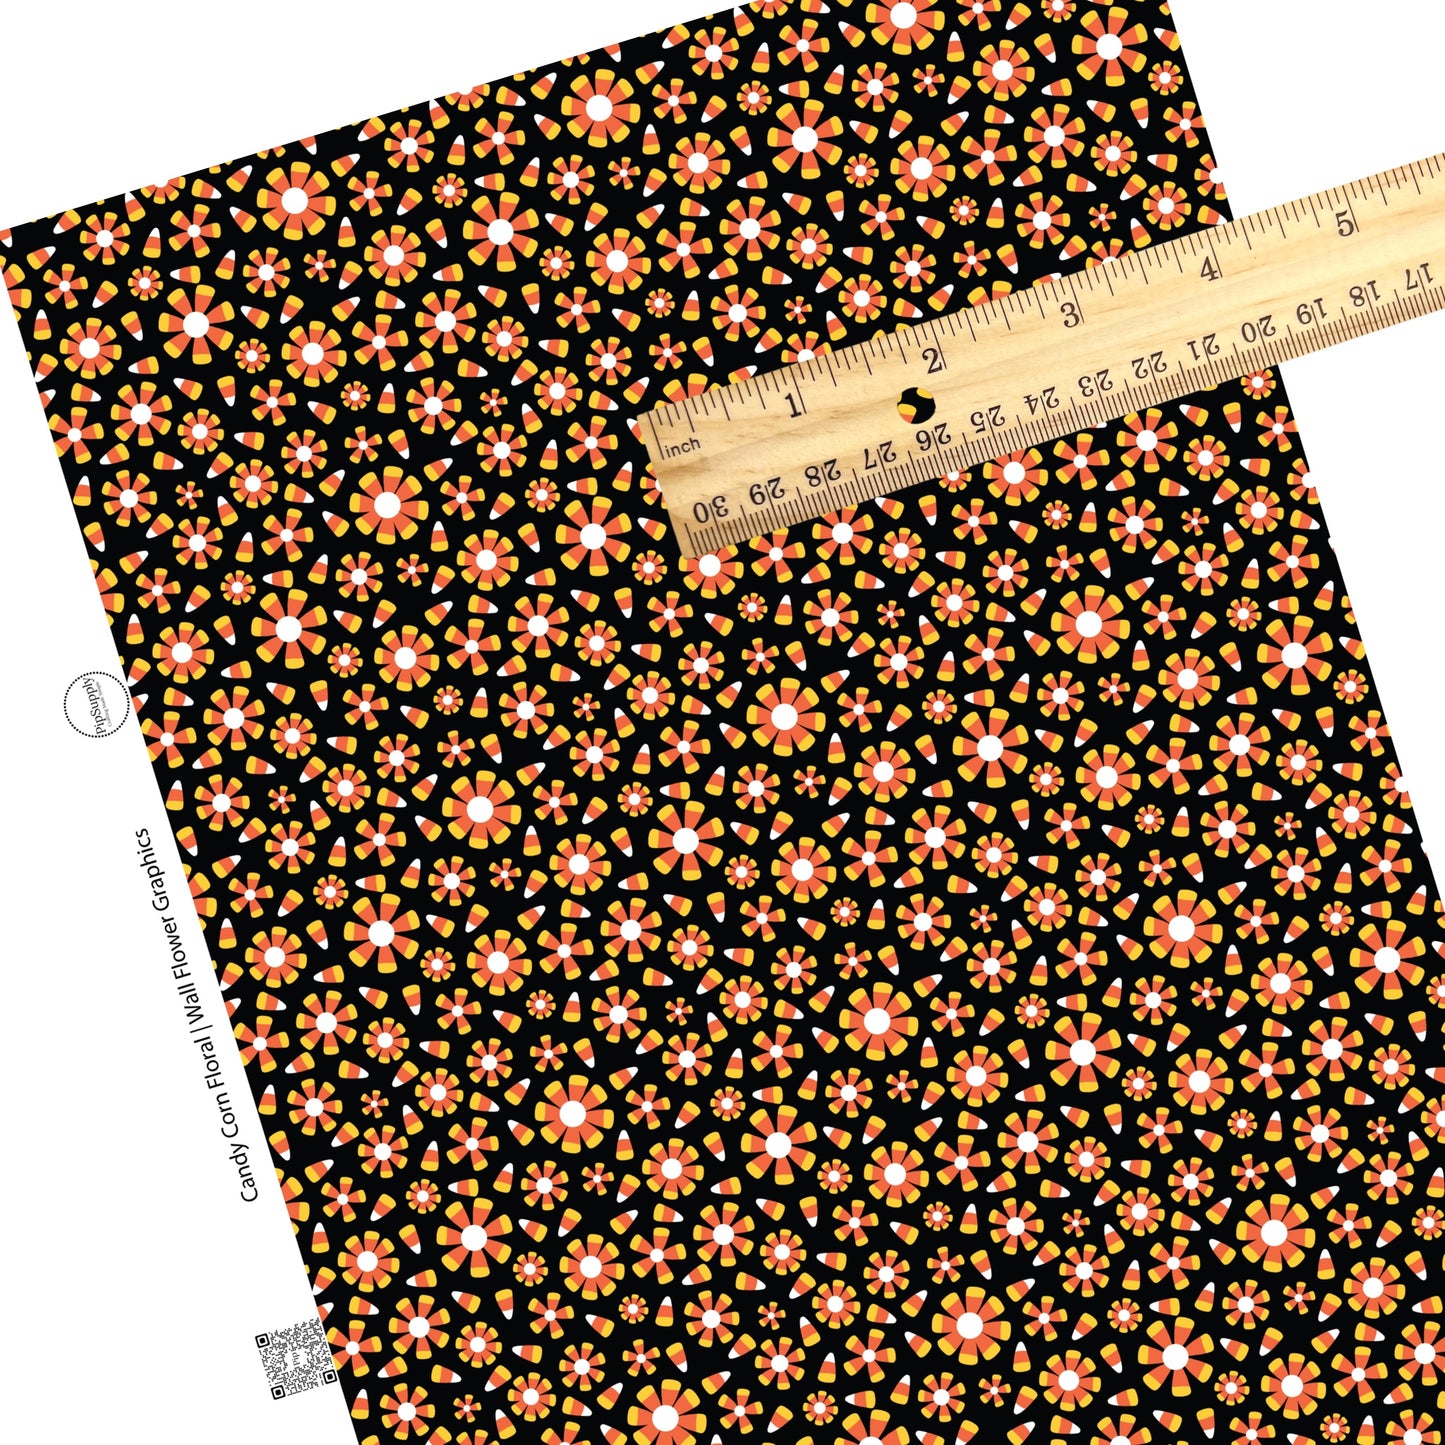 Candy corn flowers on black faux leather sheets